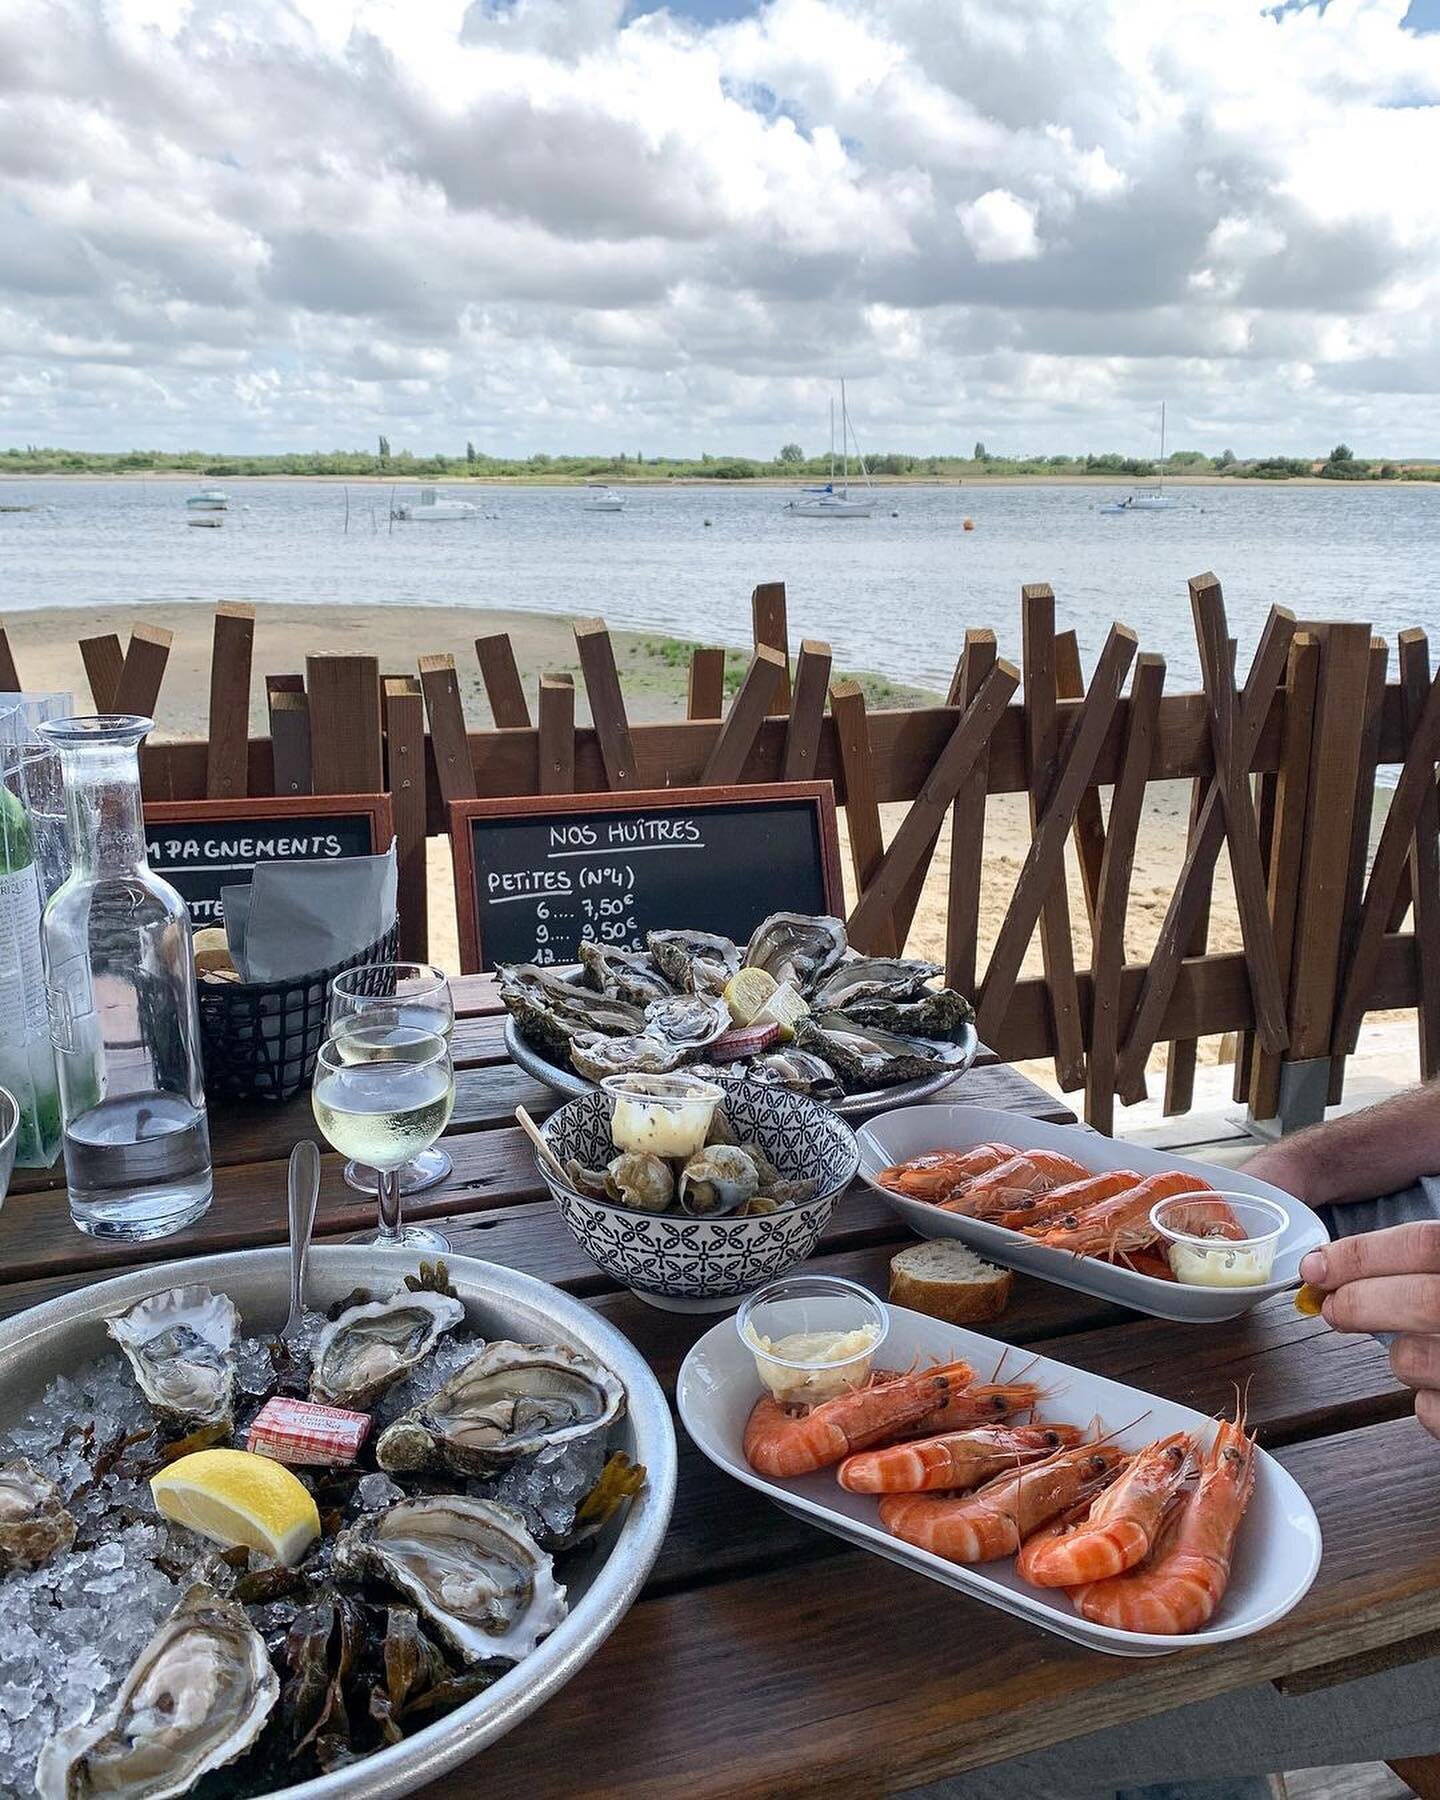 Meet us seaside at @lacabanedelaiguillon an Oyster Bar serving up freshly shucked local oysters, regional wines, all served in a sea-view terrace. 🦪✨

Location: Arcachon, France
Image: @bertillecnt